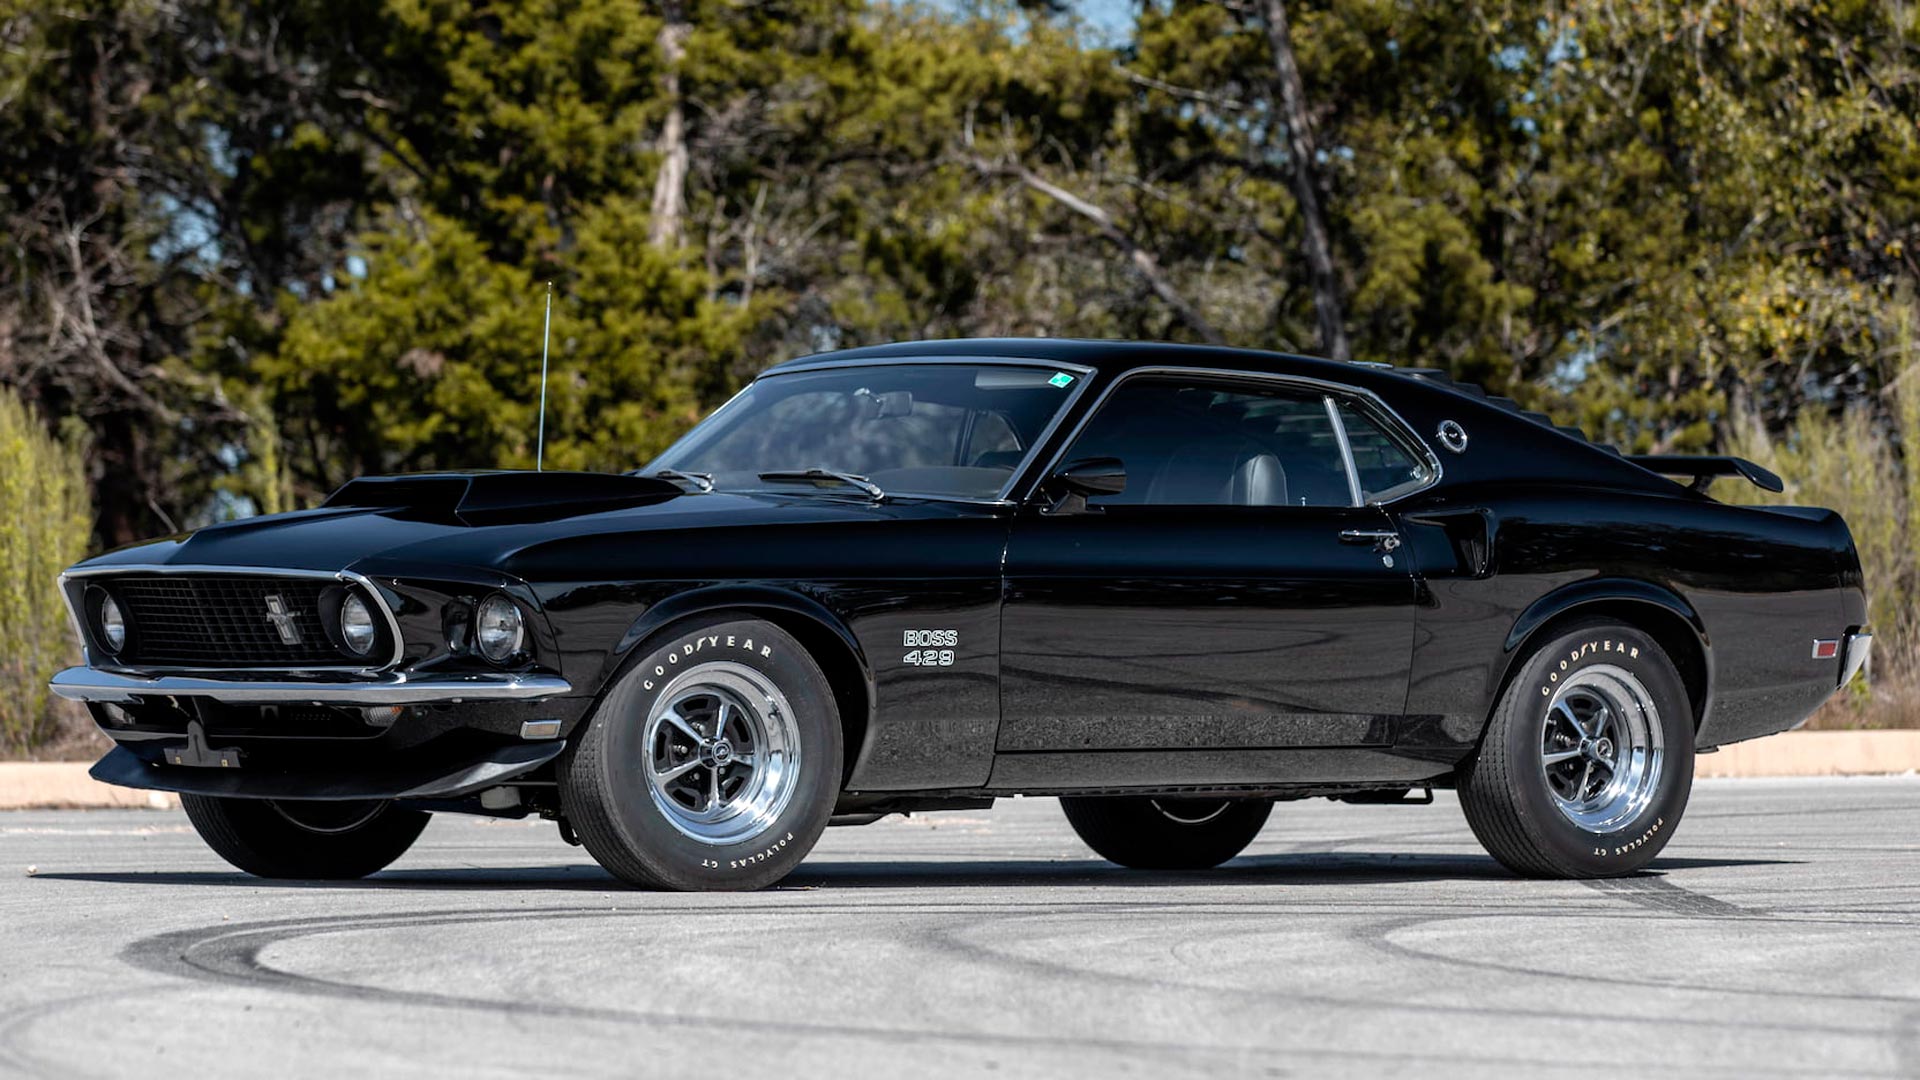 Ford Mustang Boss 429 once owned by Paul Walker is going to auction